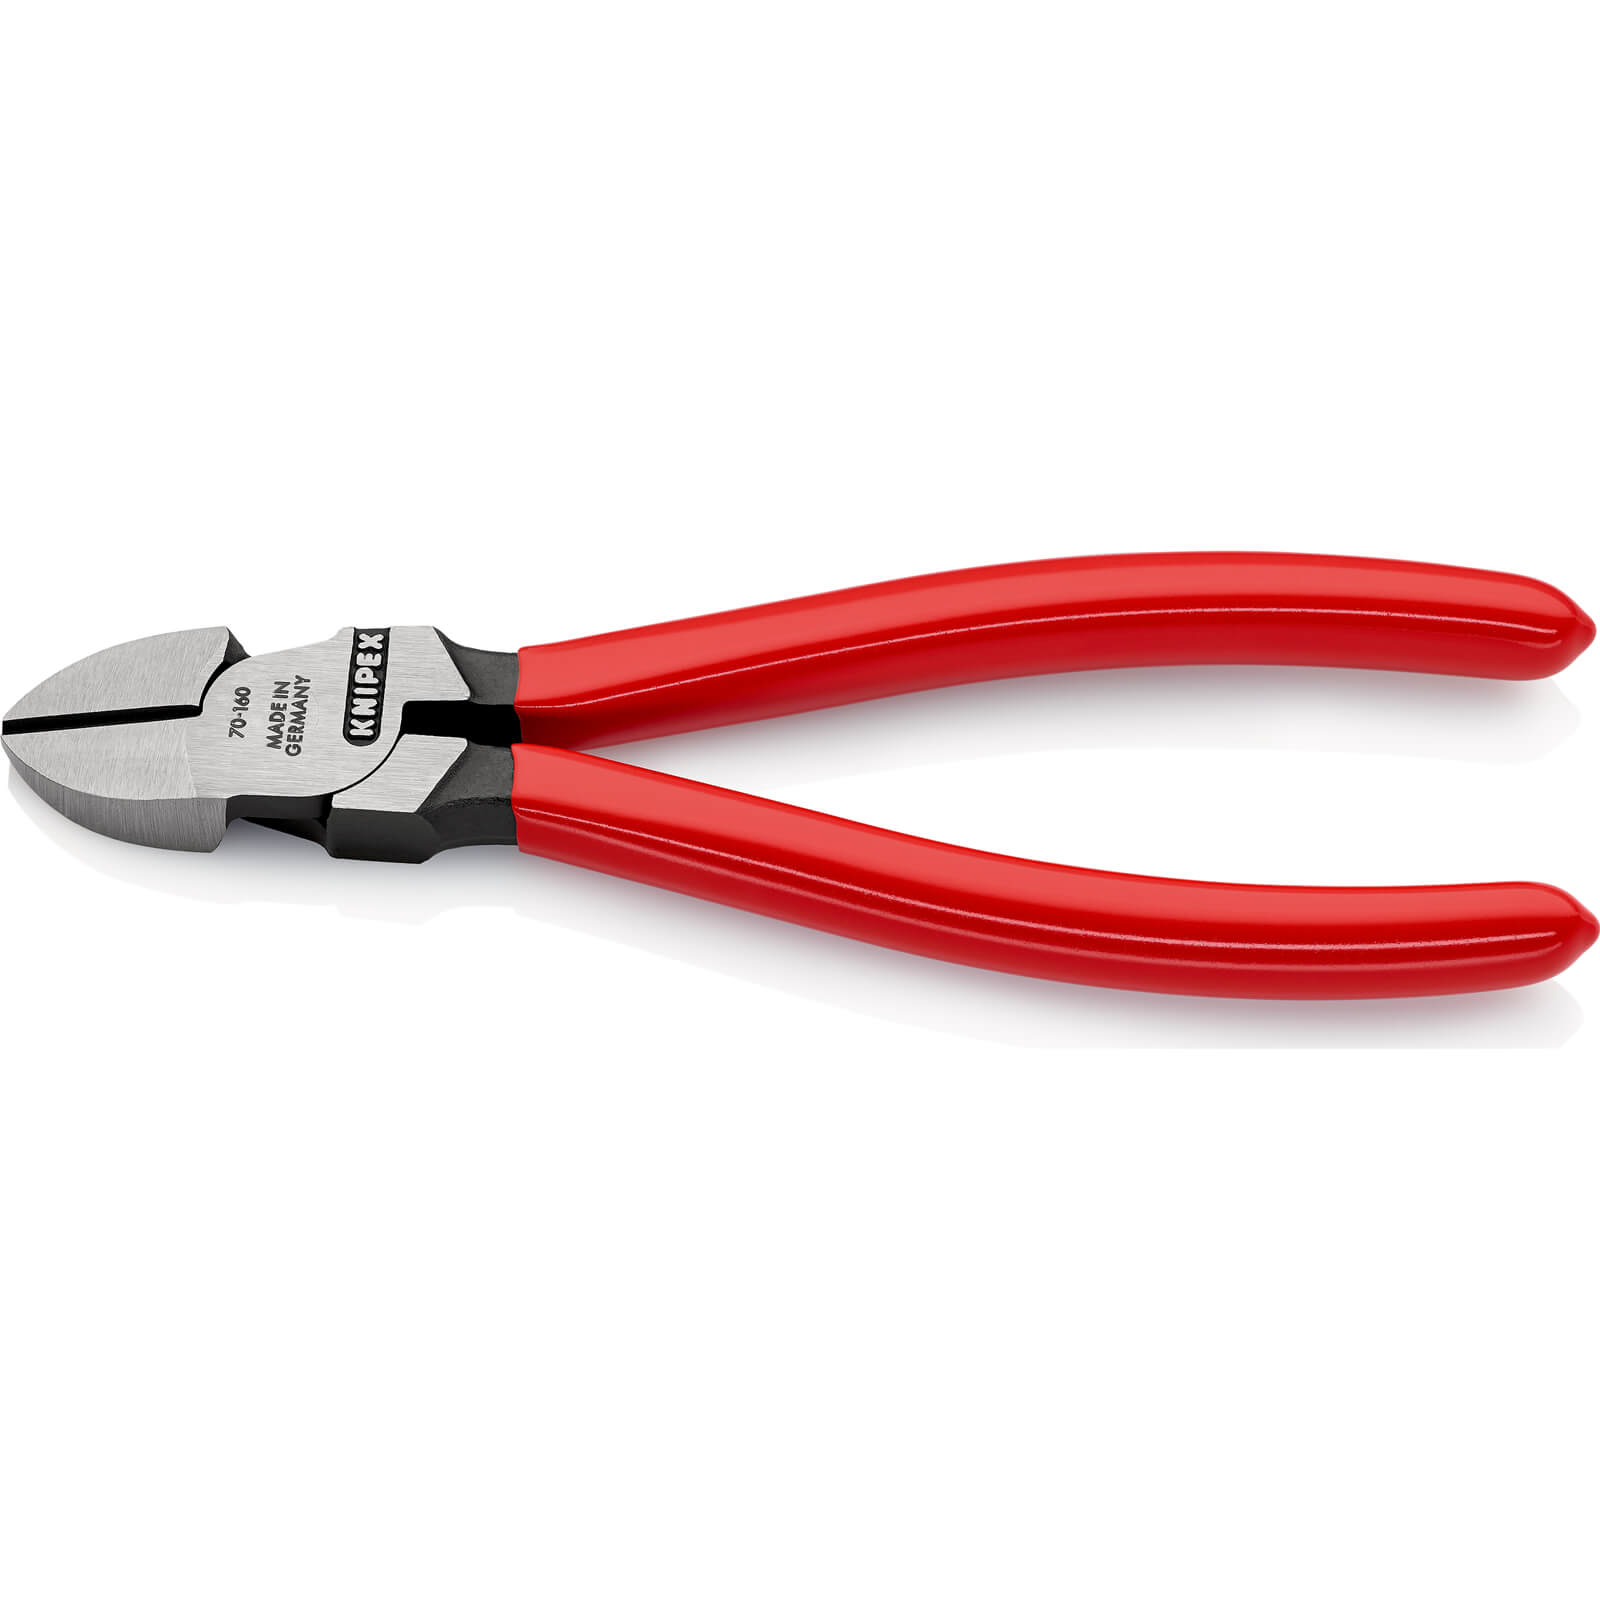 Image of Knipex 70 01 Diagonal Cutting Pliers 160mm